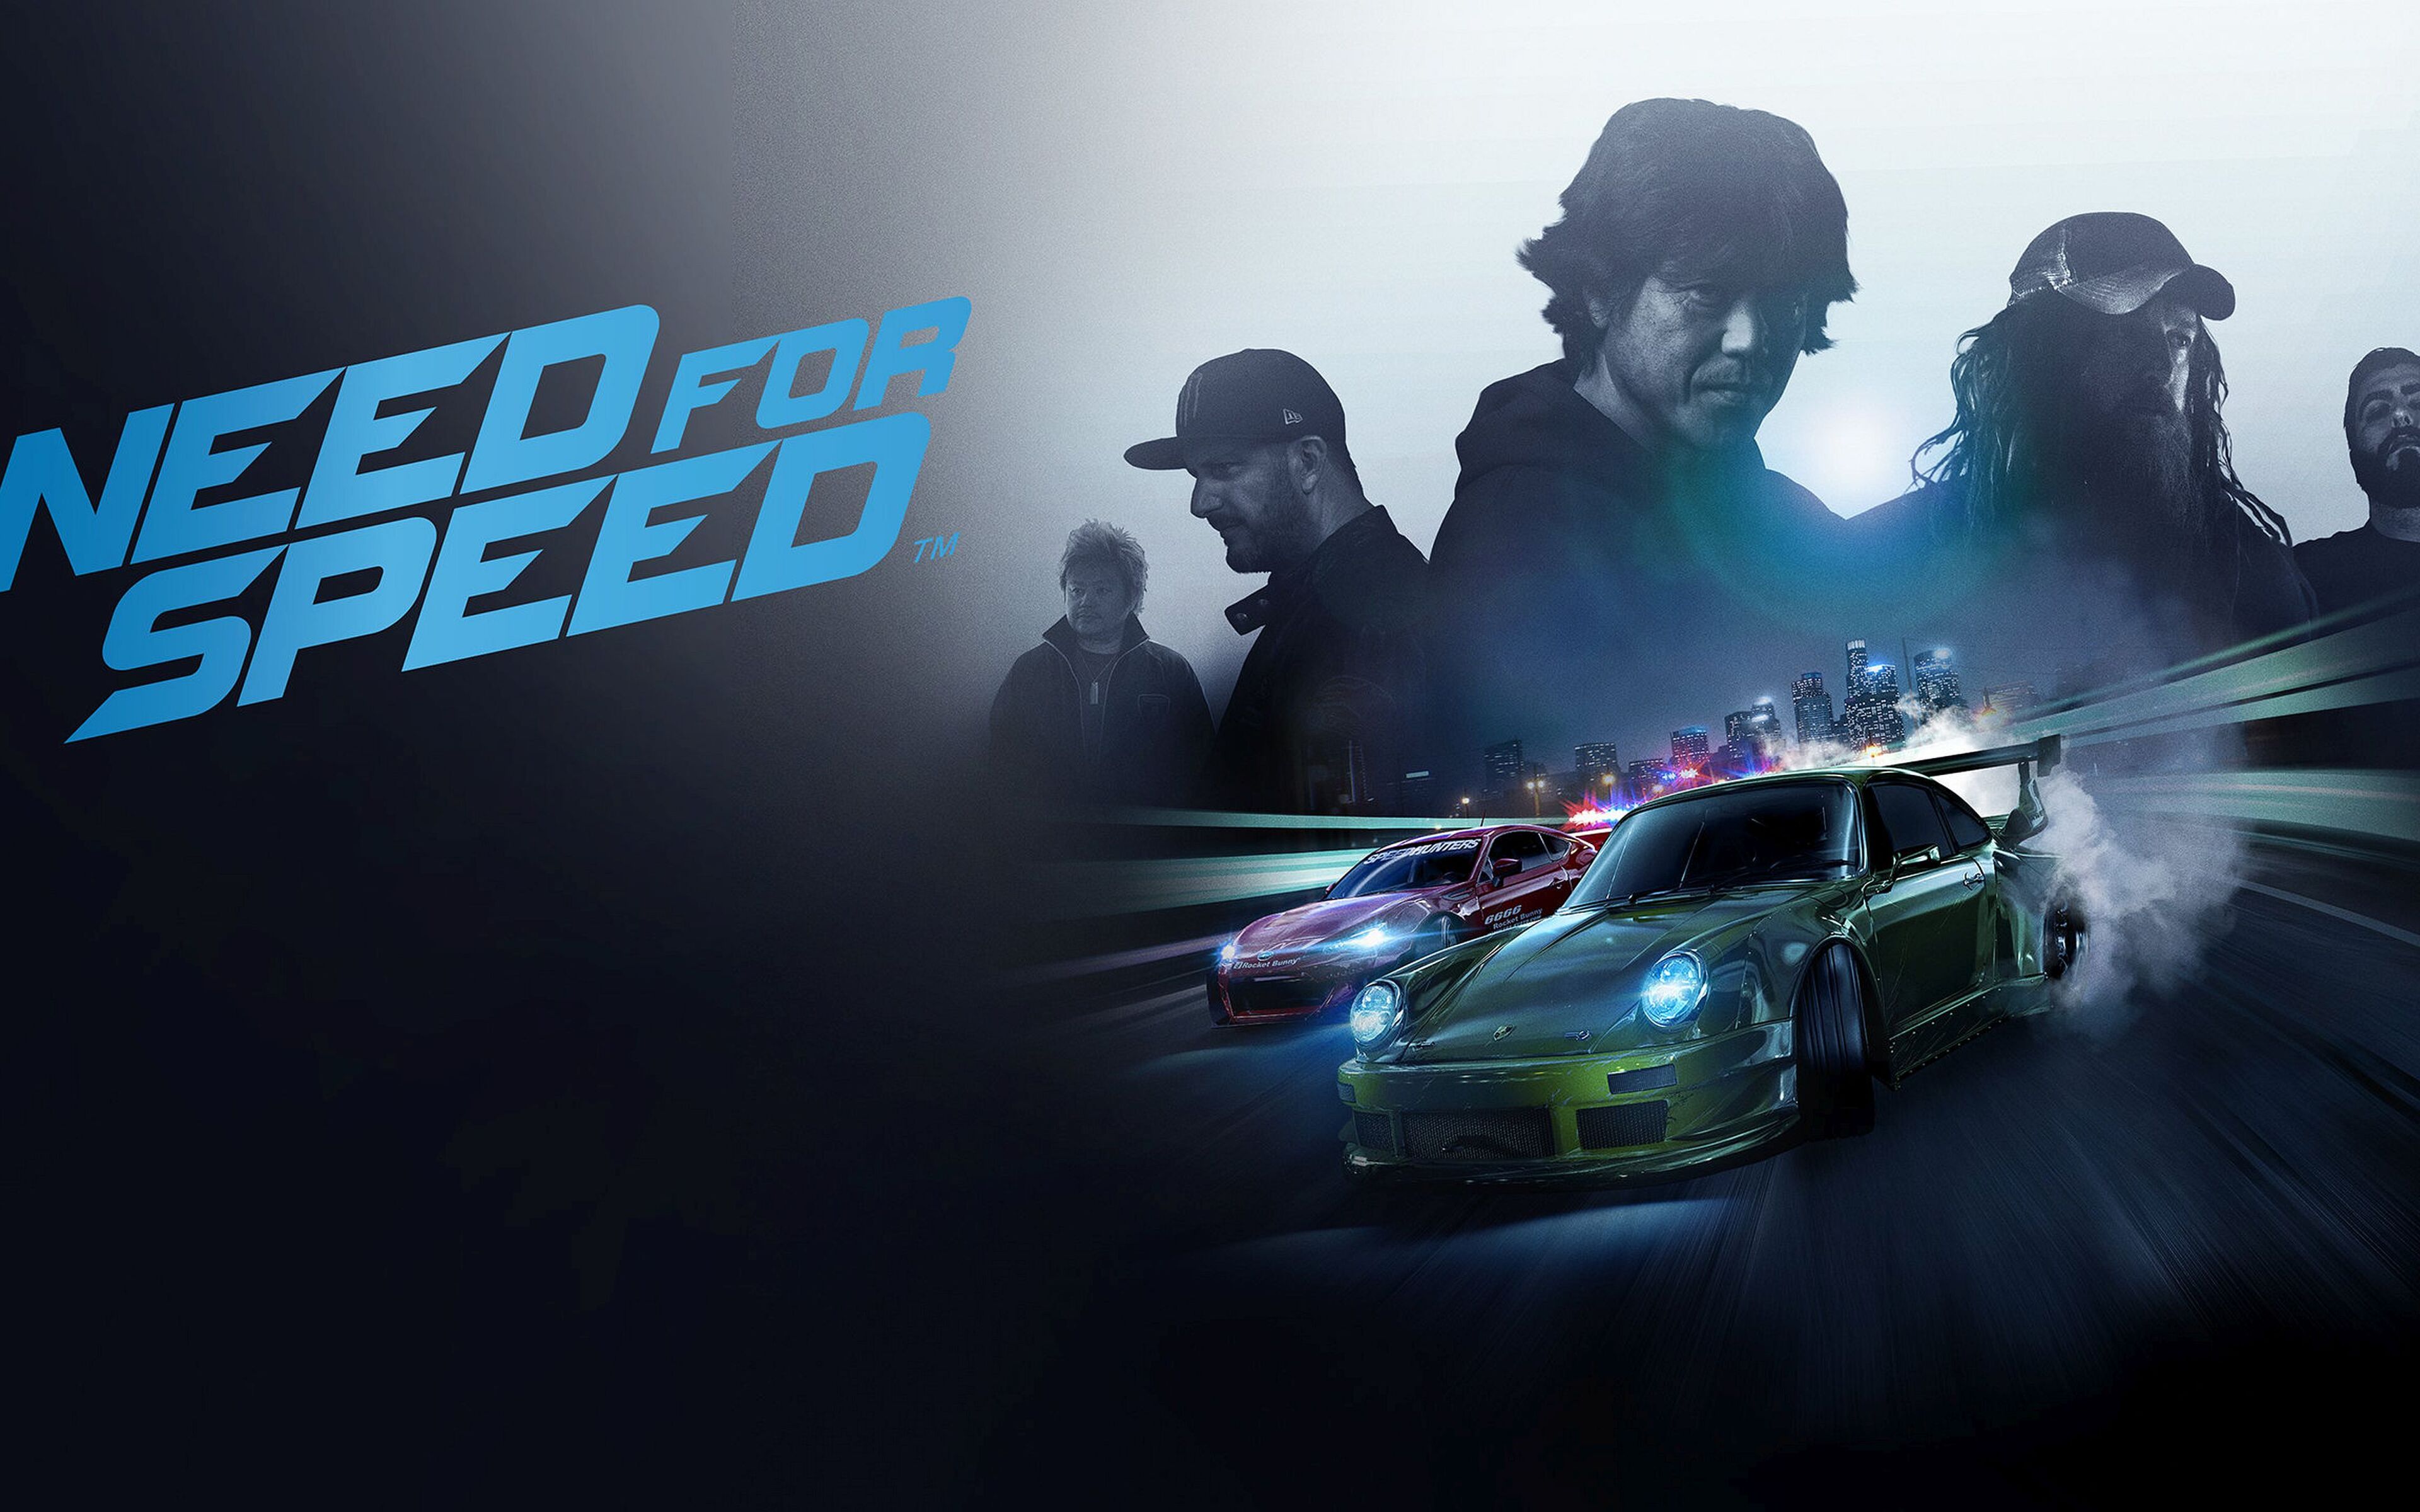 Need for Speed™